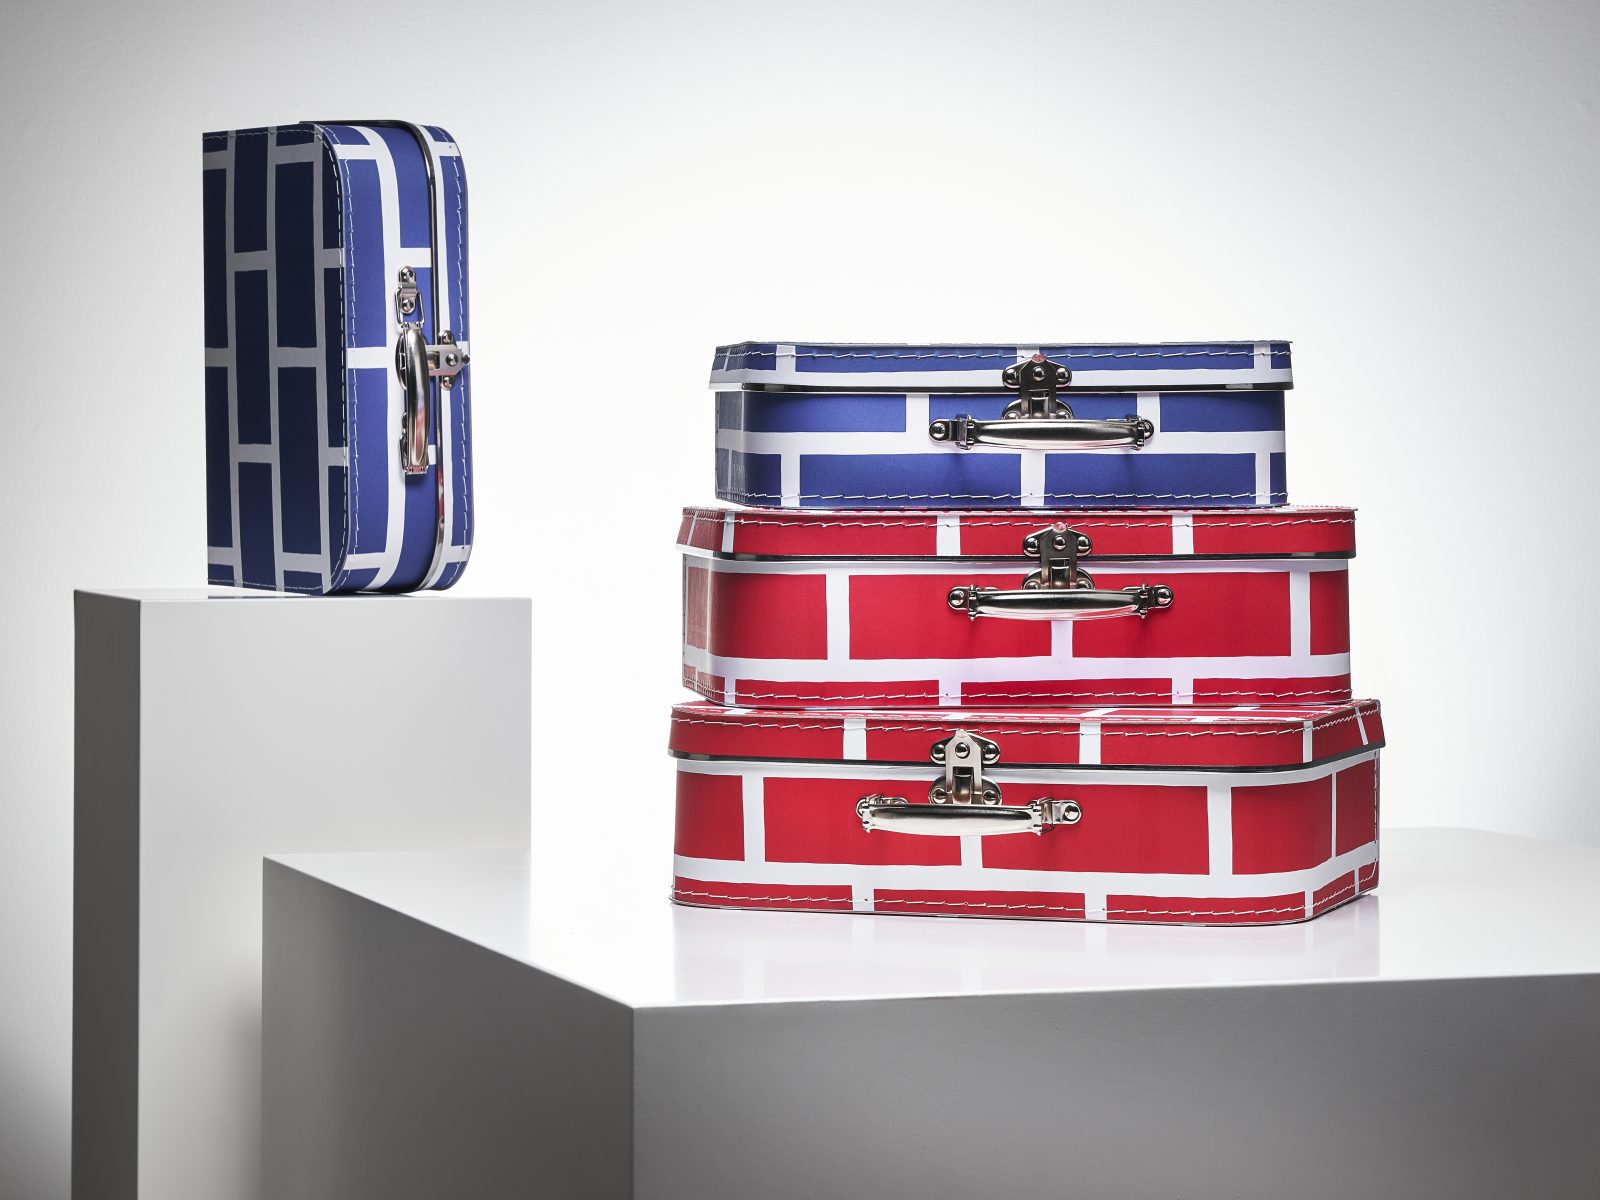 Different sized suitcases with graphic patterns in blue/white and red/white.